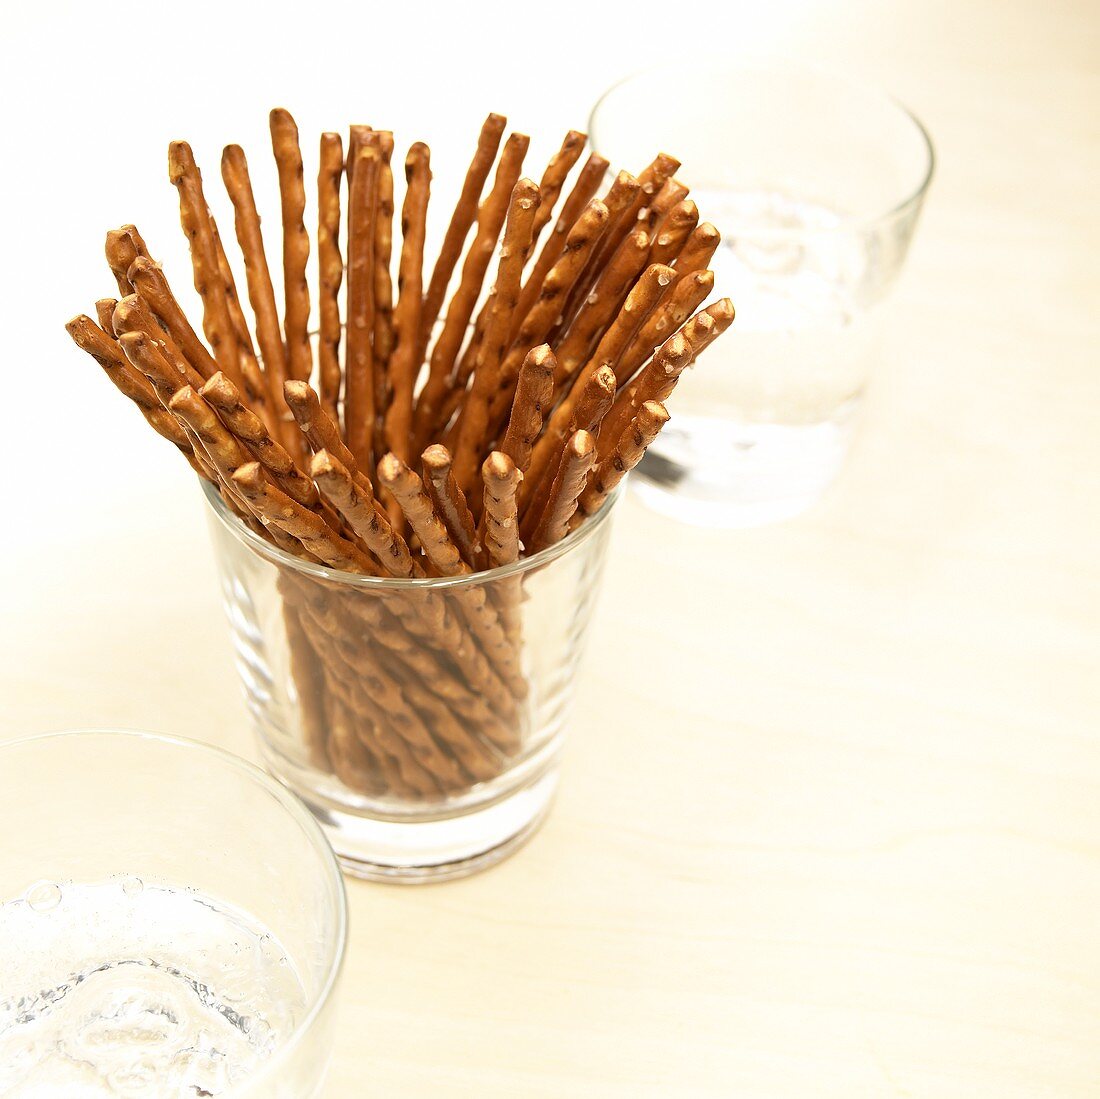 Salted straws in a glass